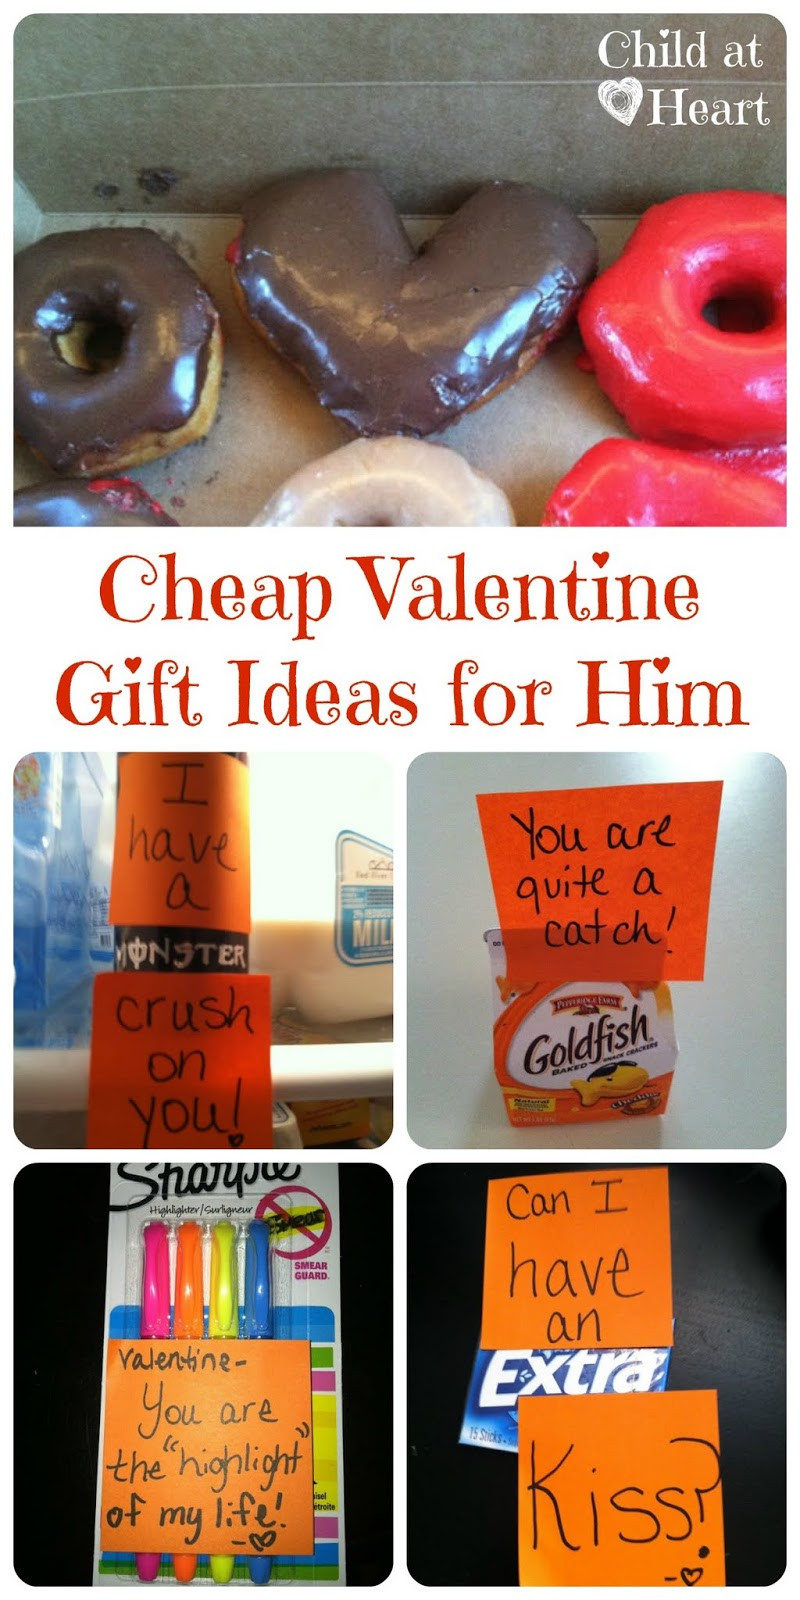 Inexpensive Valentines Gift Ideas
 Cheap Valentine Gift Ideas for Him Child at Heart Blog